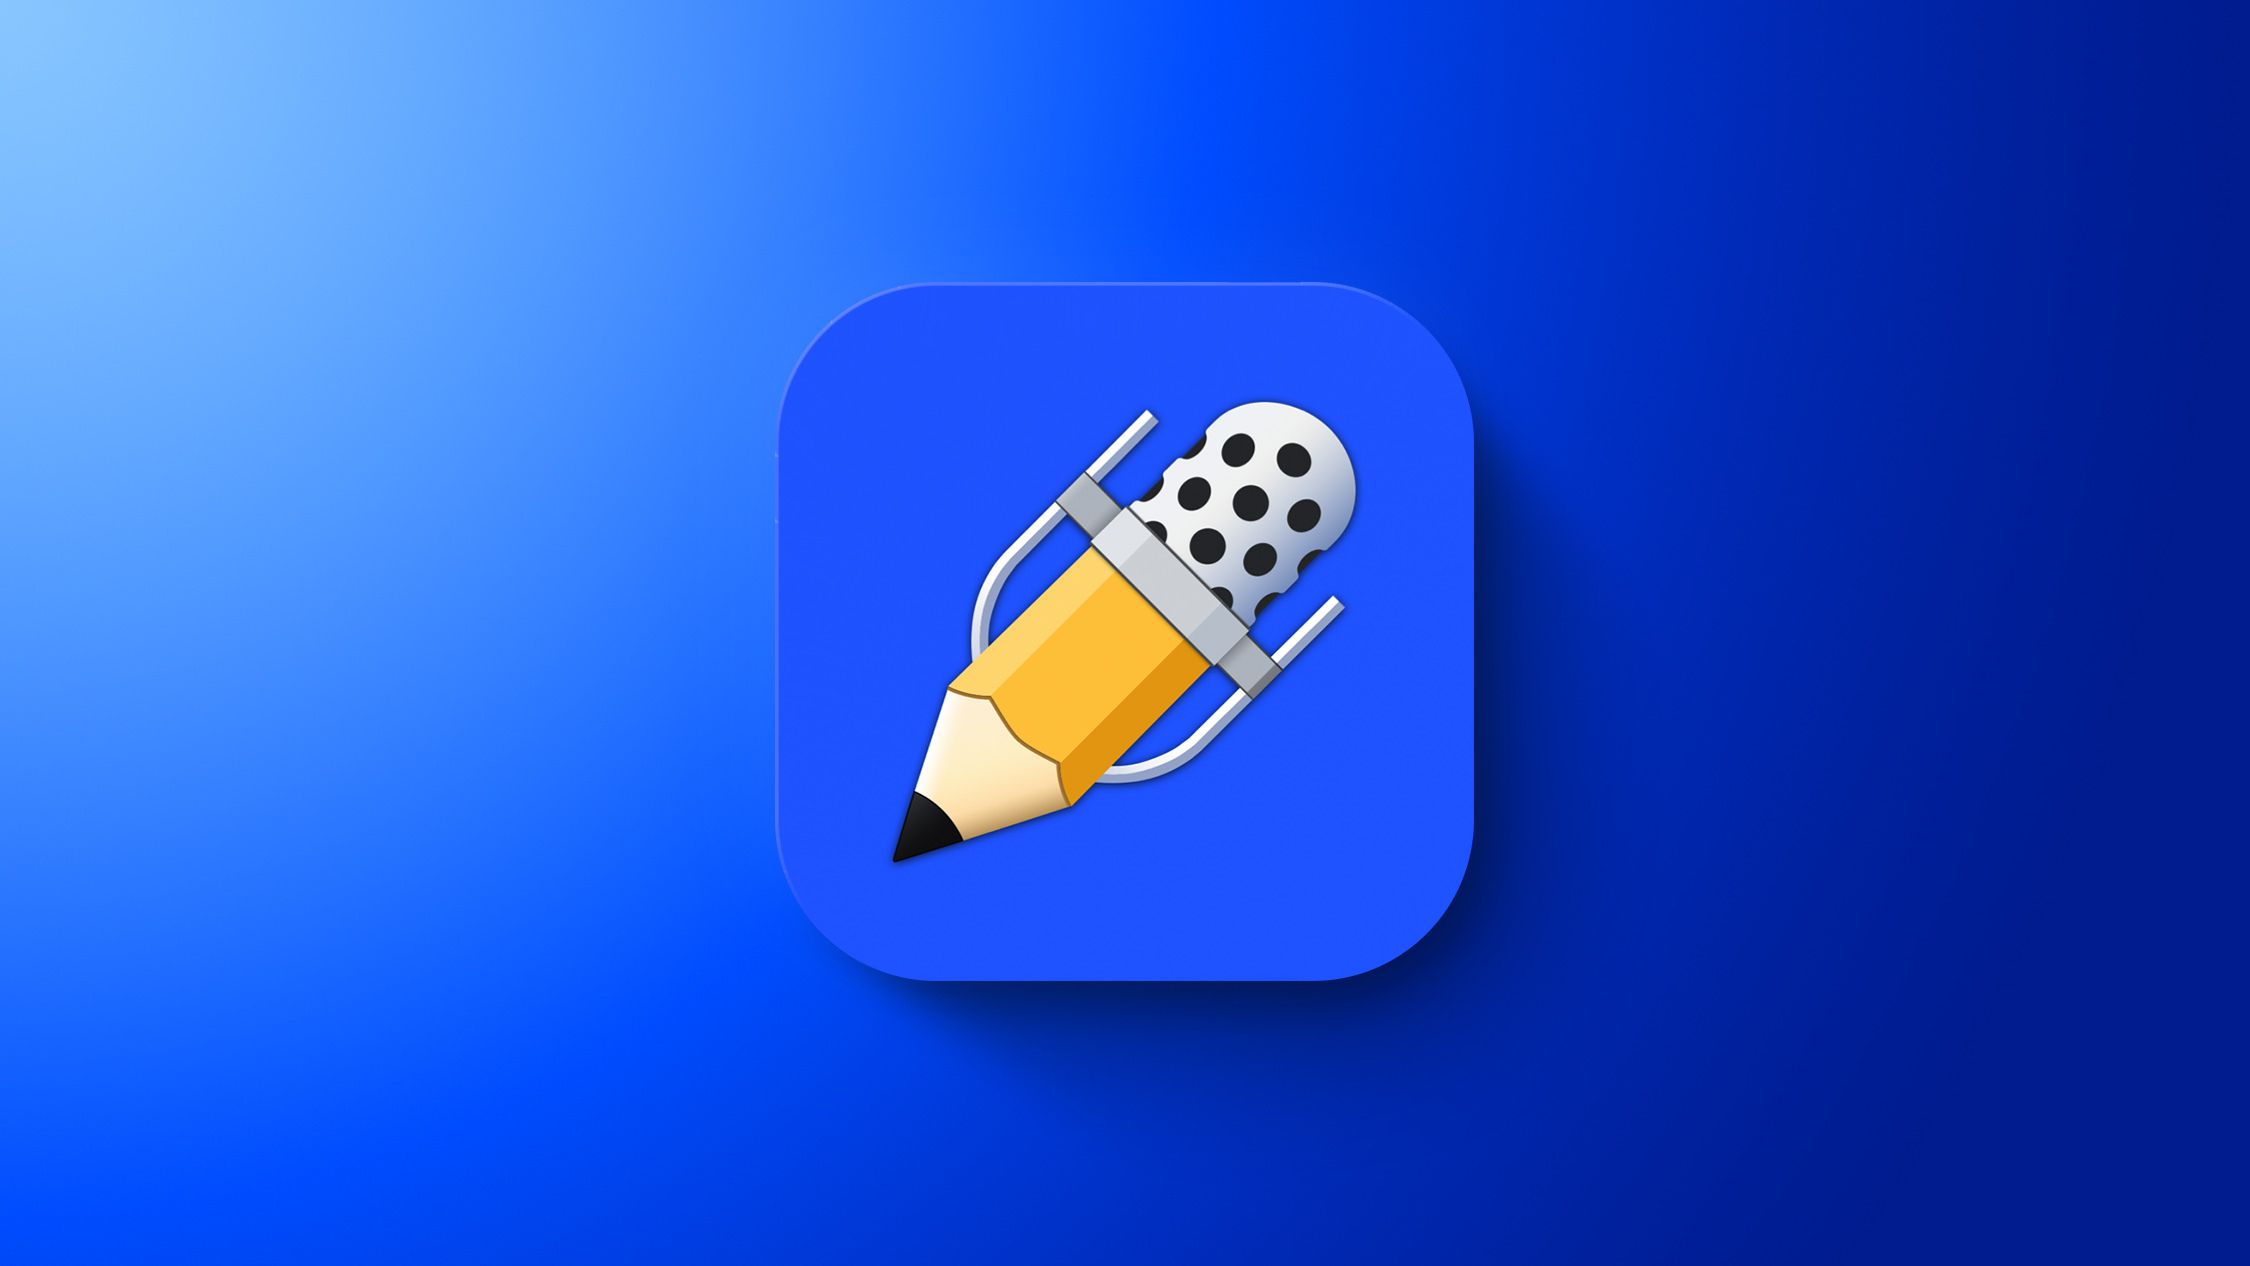 notability features 2021